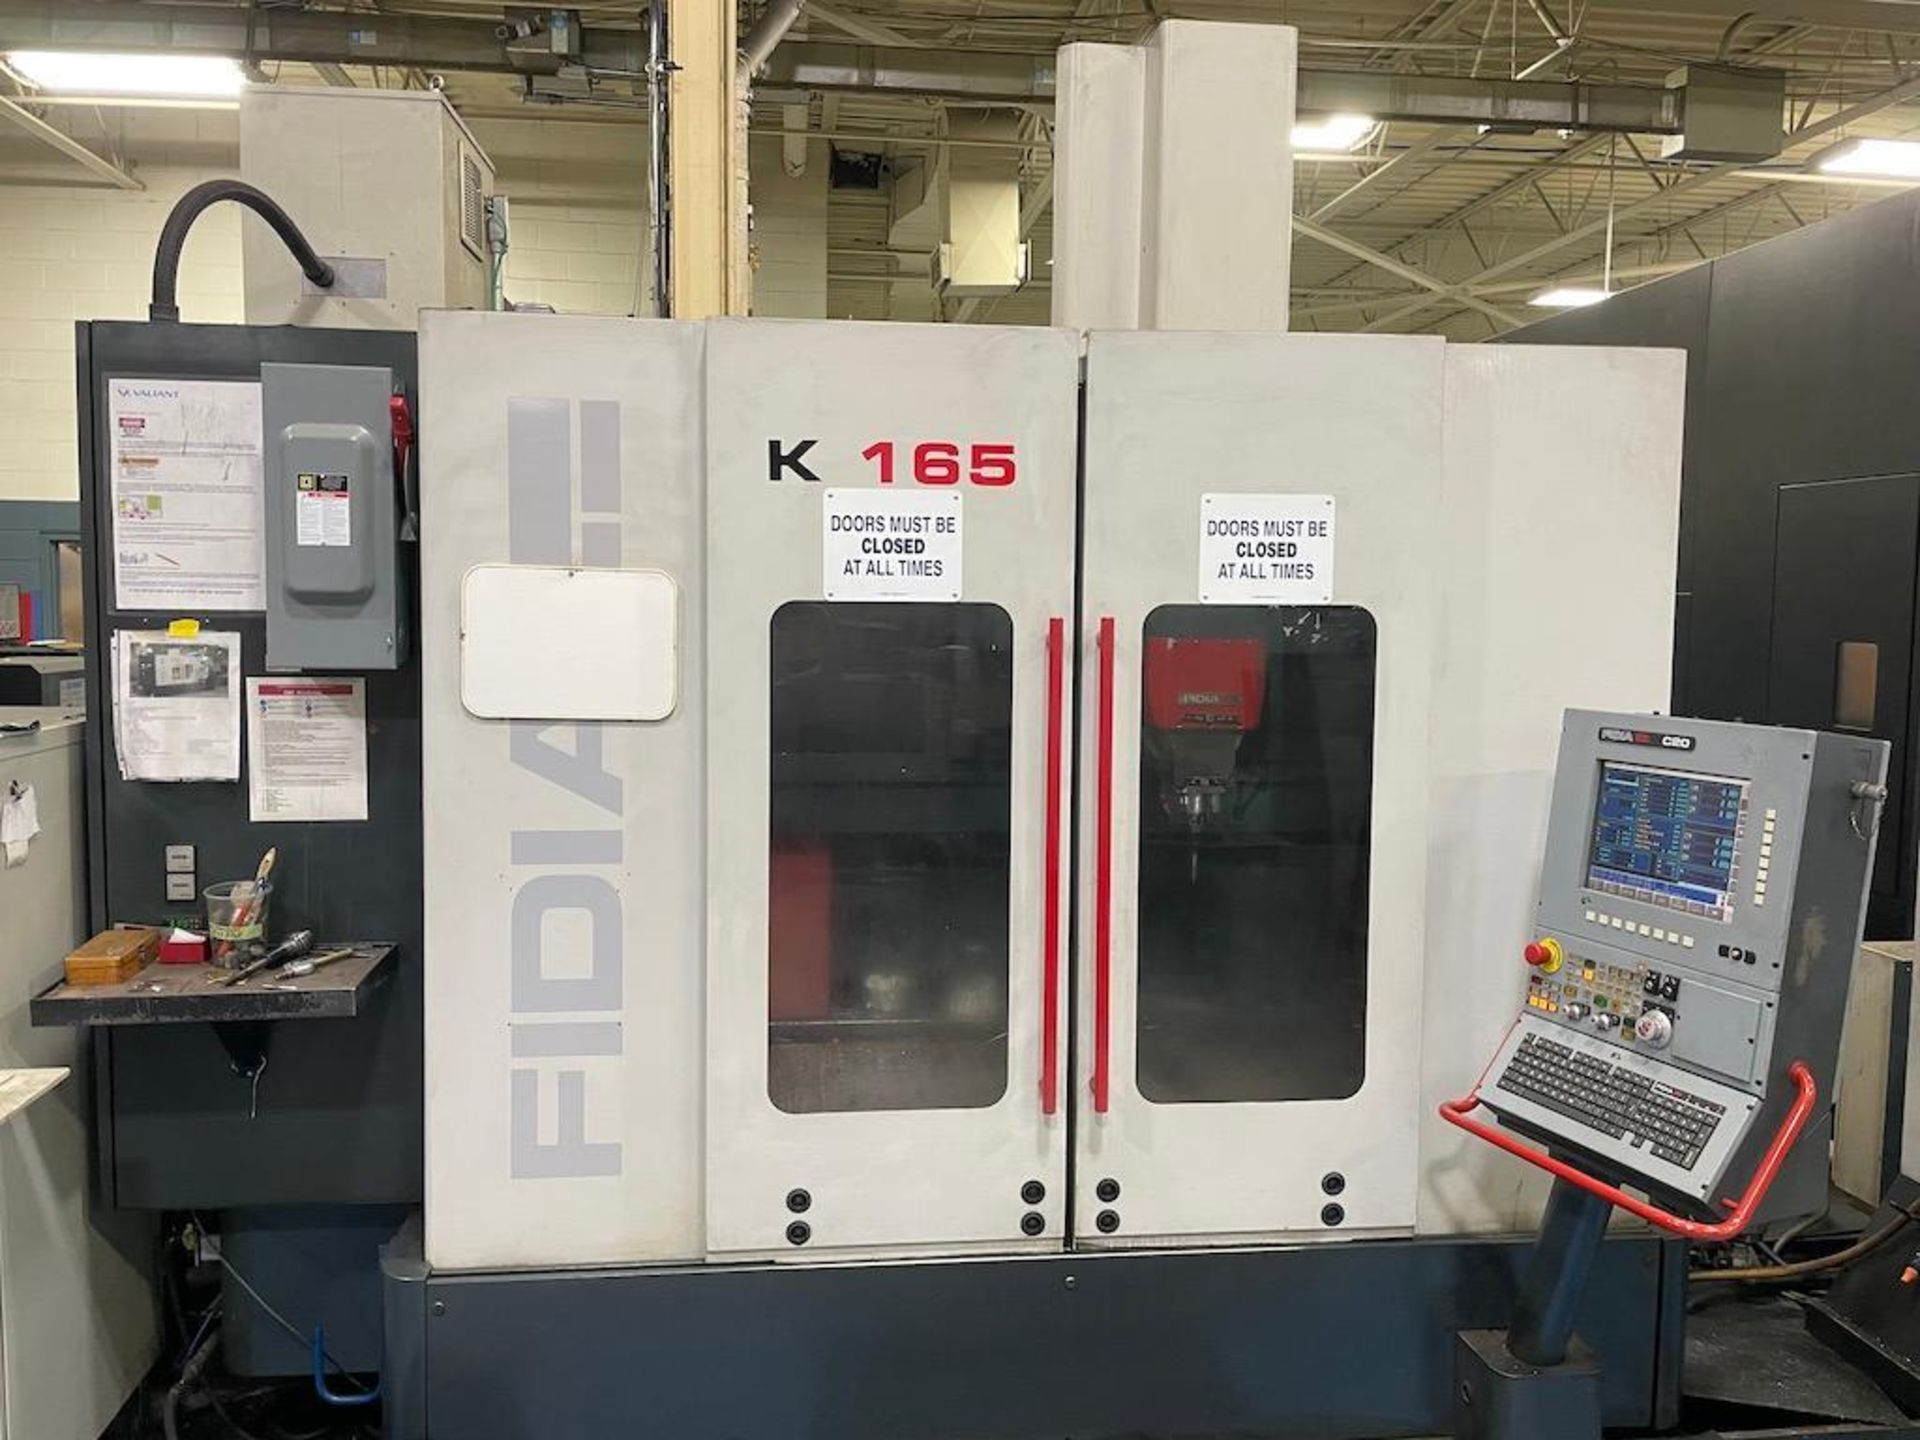 Fidia K165/BHS 3 + 2 High Speed CNC Vertical Machining Center, Fidia C20 CNC Control, Travels X-39.3 - Image 14 of 17